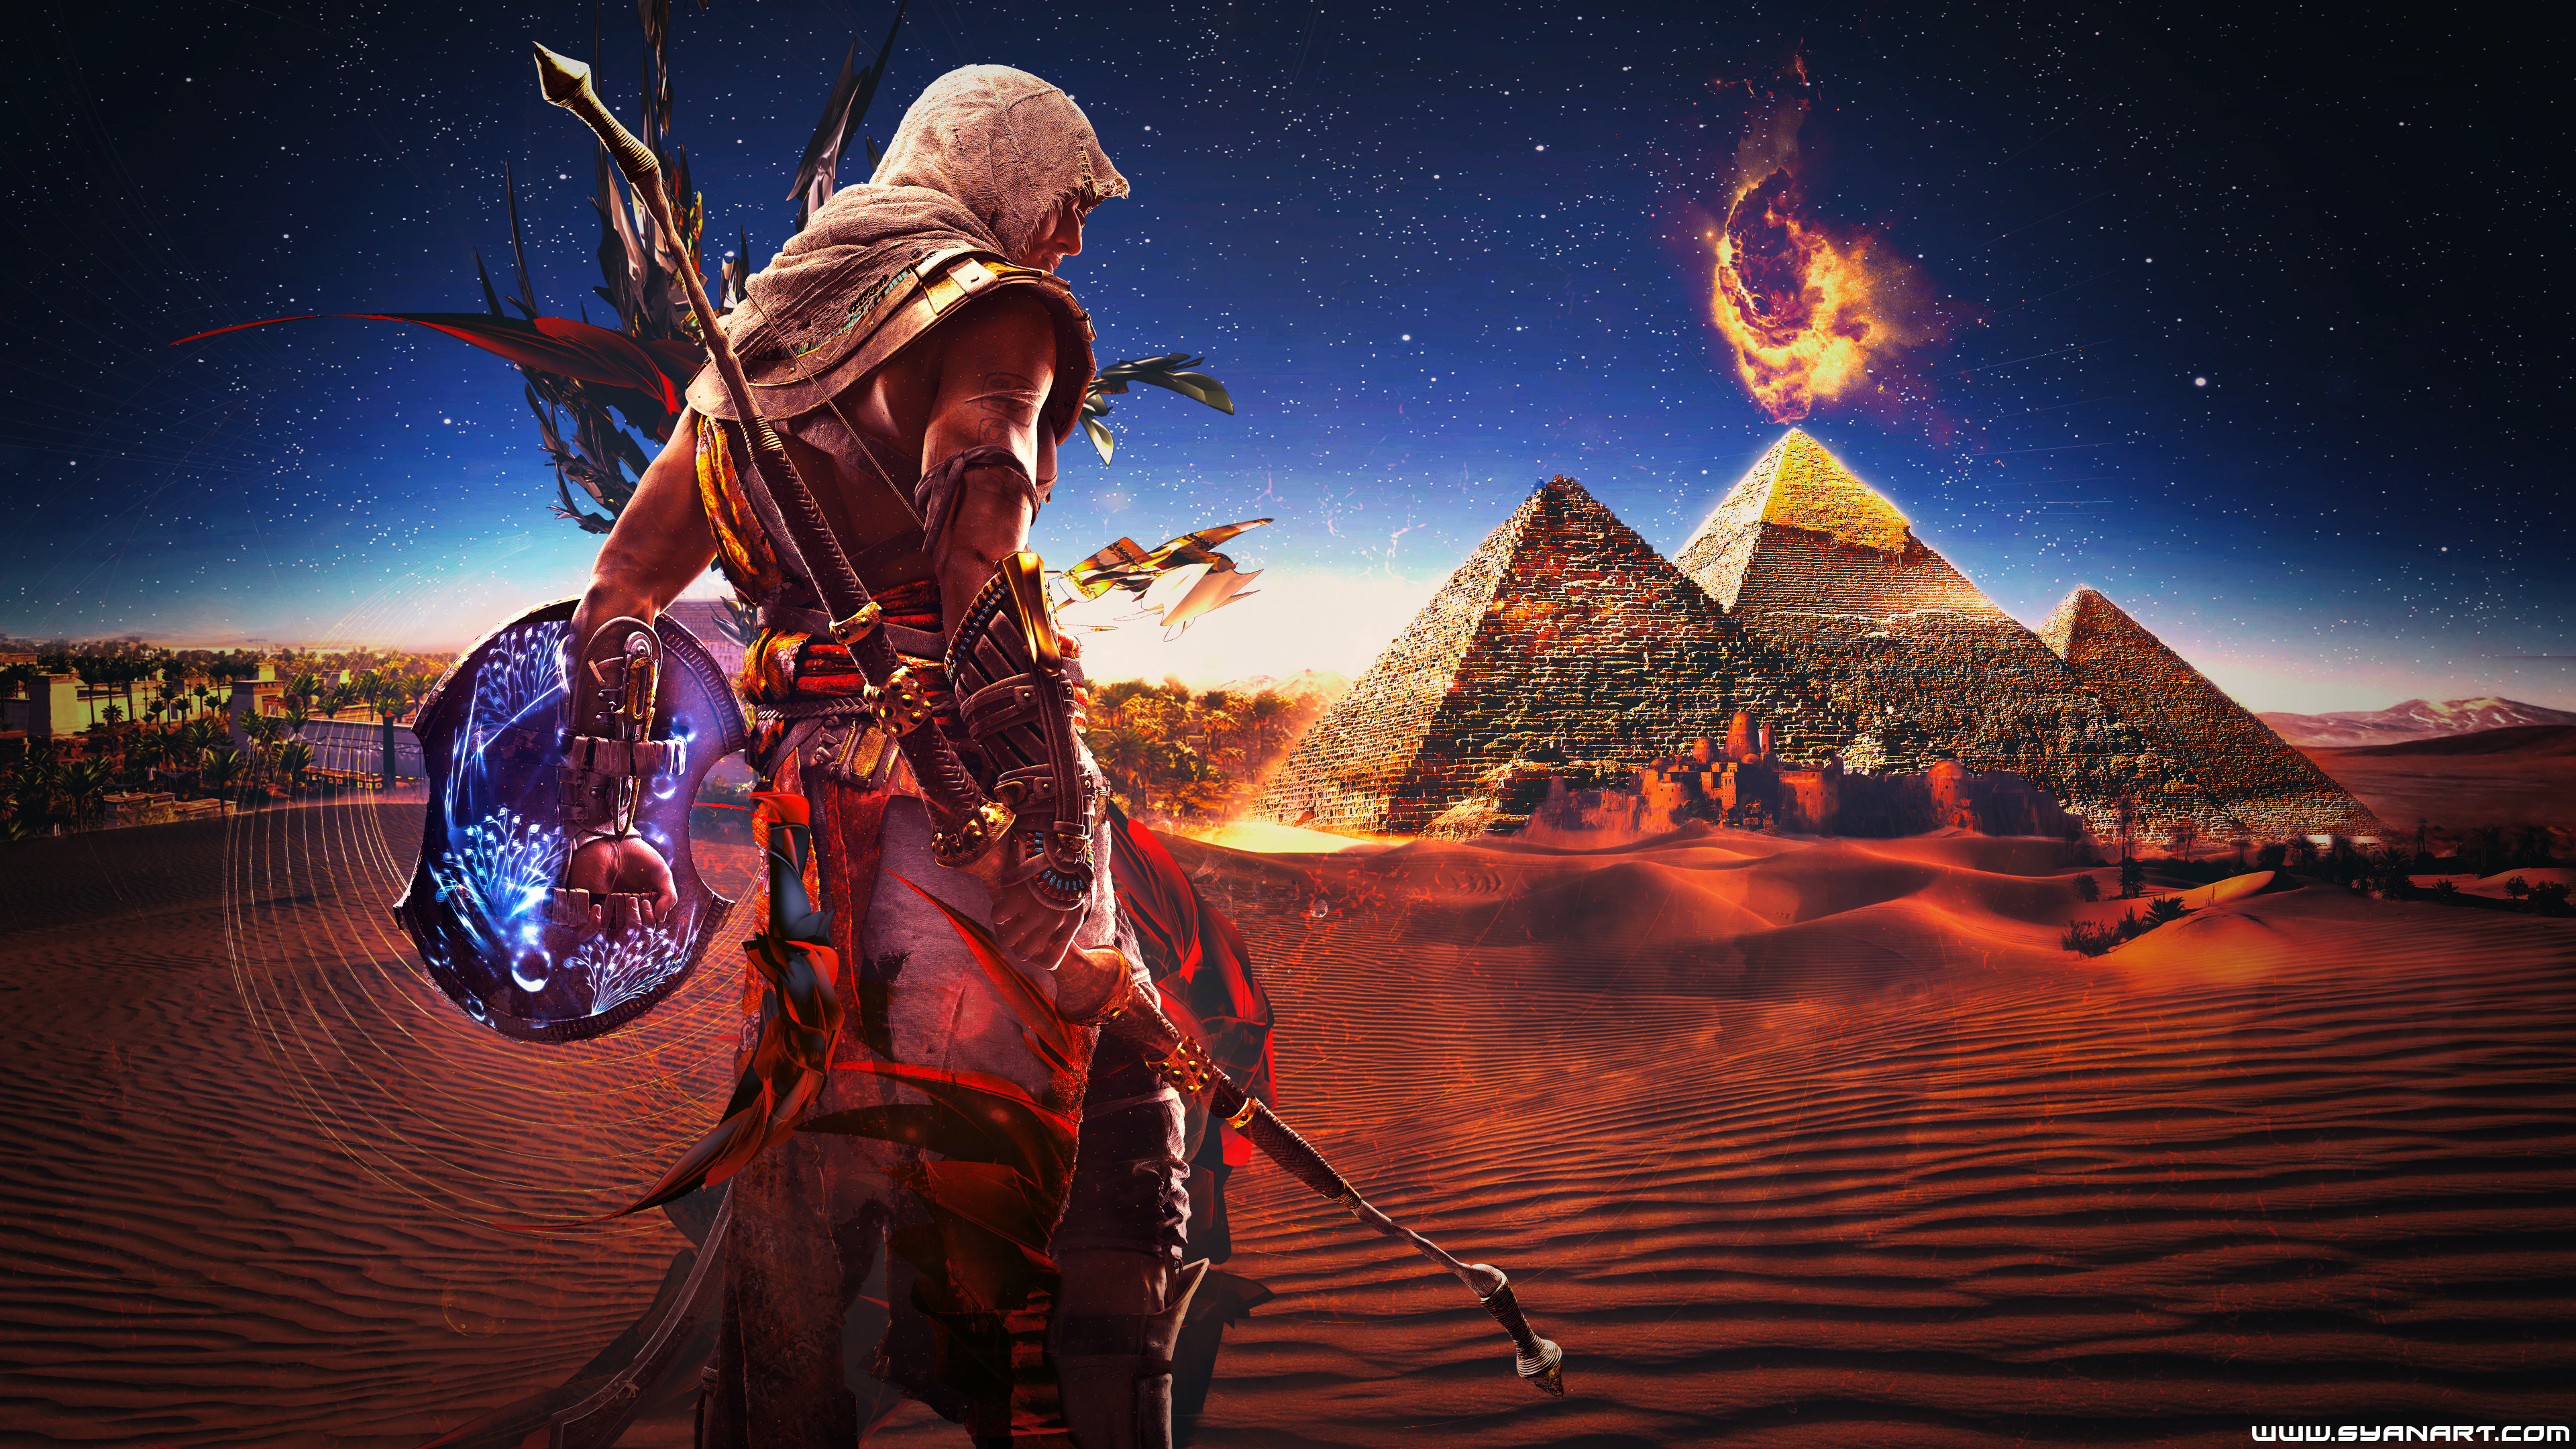 egypt, video game, assassin's creed origins, bayek of siwa, assassin's creed